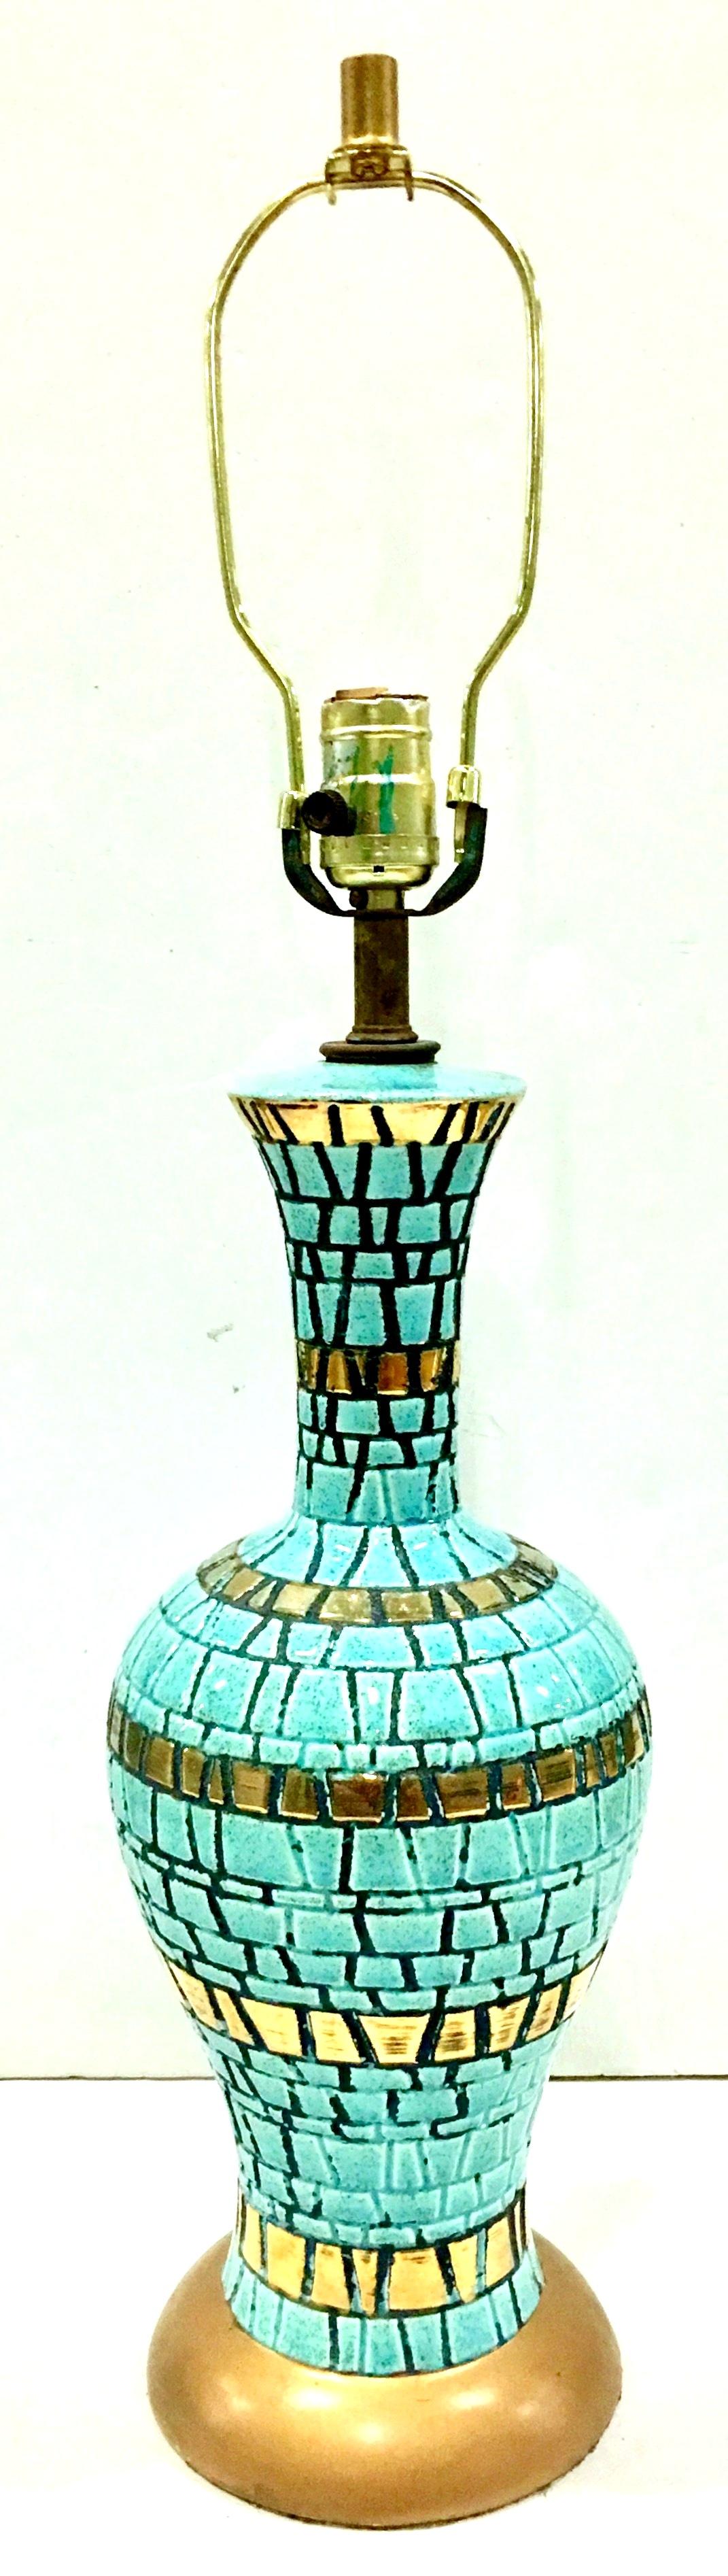 1950'S, Mid-Century Modern Martz style turquoise and metallic gold with black accent ceramic mosaic tile table lamp. Gold metallic painted brass base. Includes brass finial and harp. Wired for the US and in working order.
Measures: Height to socket,